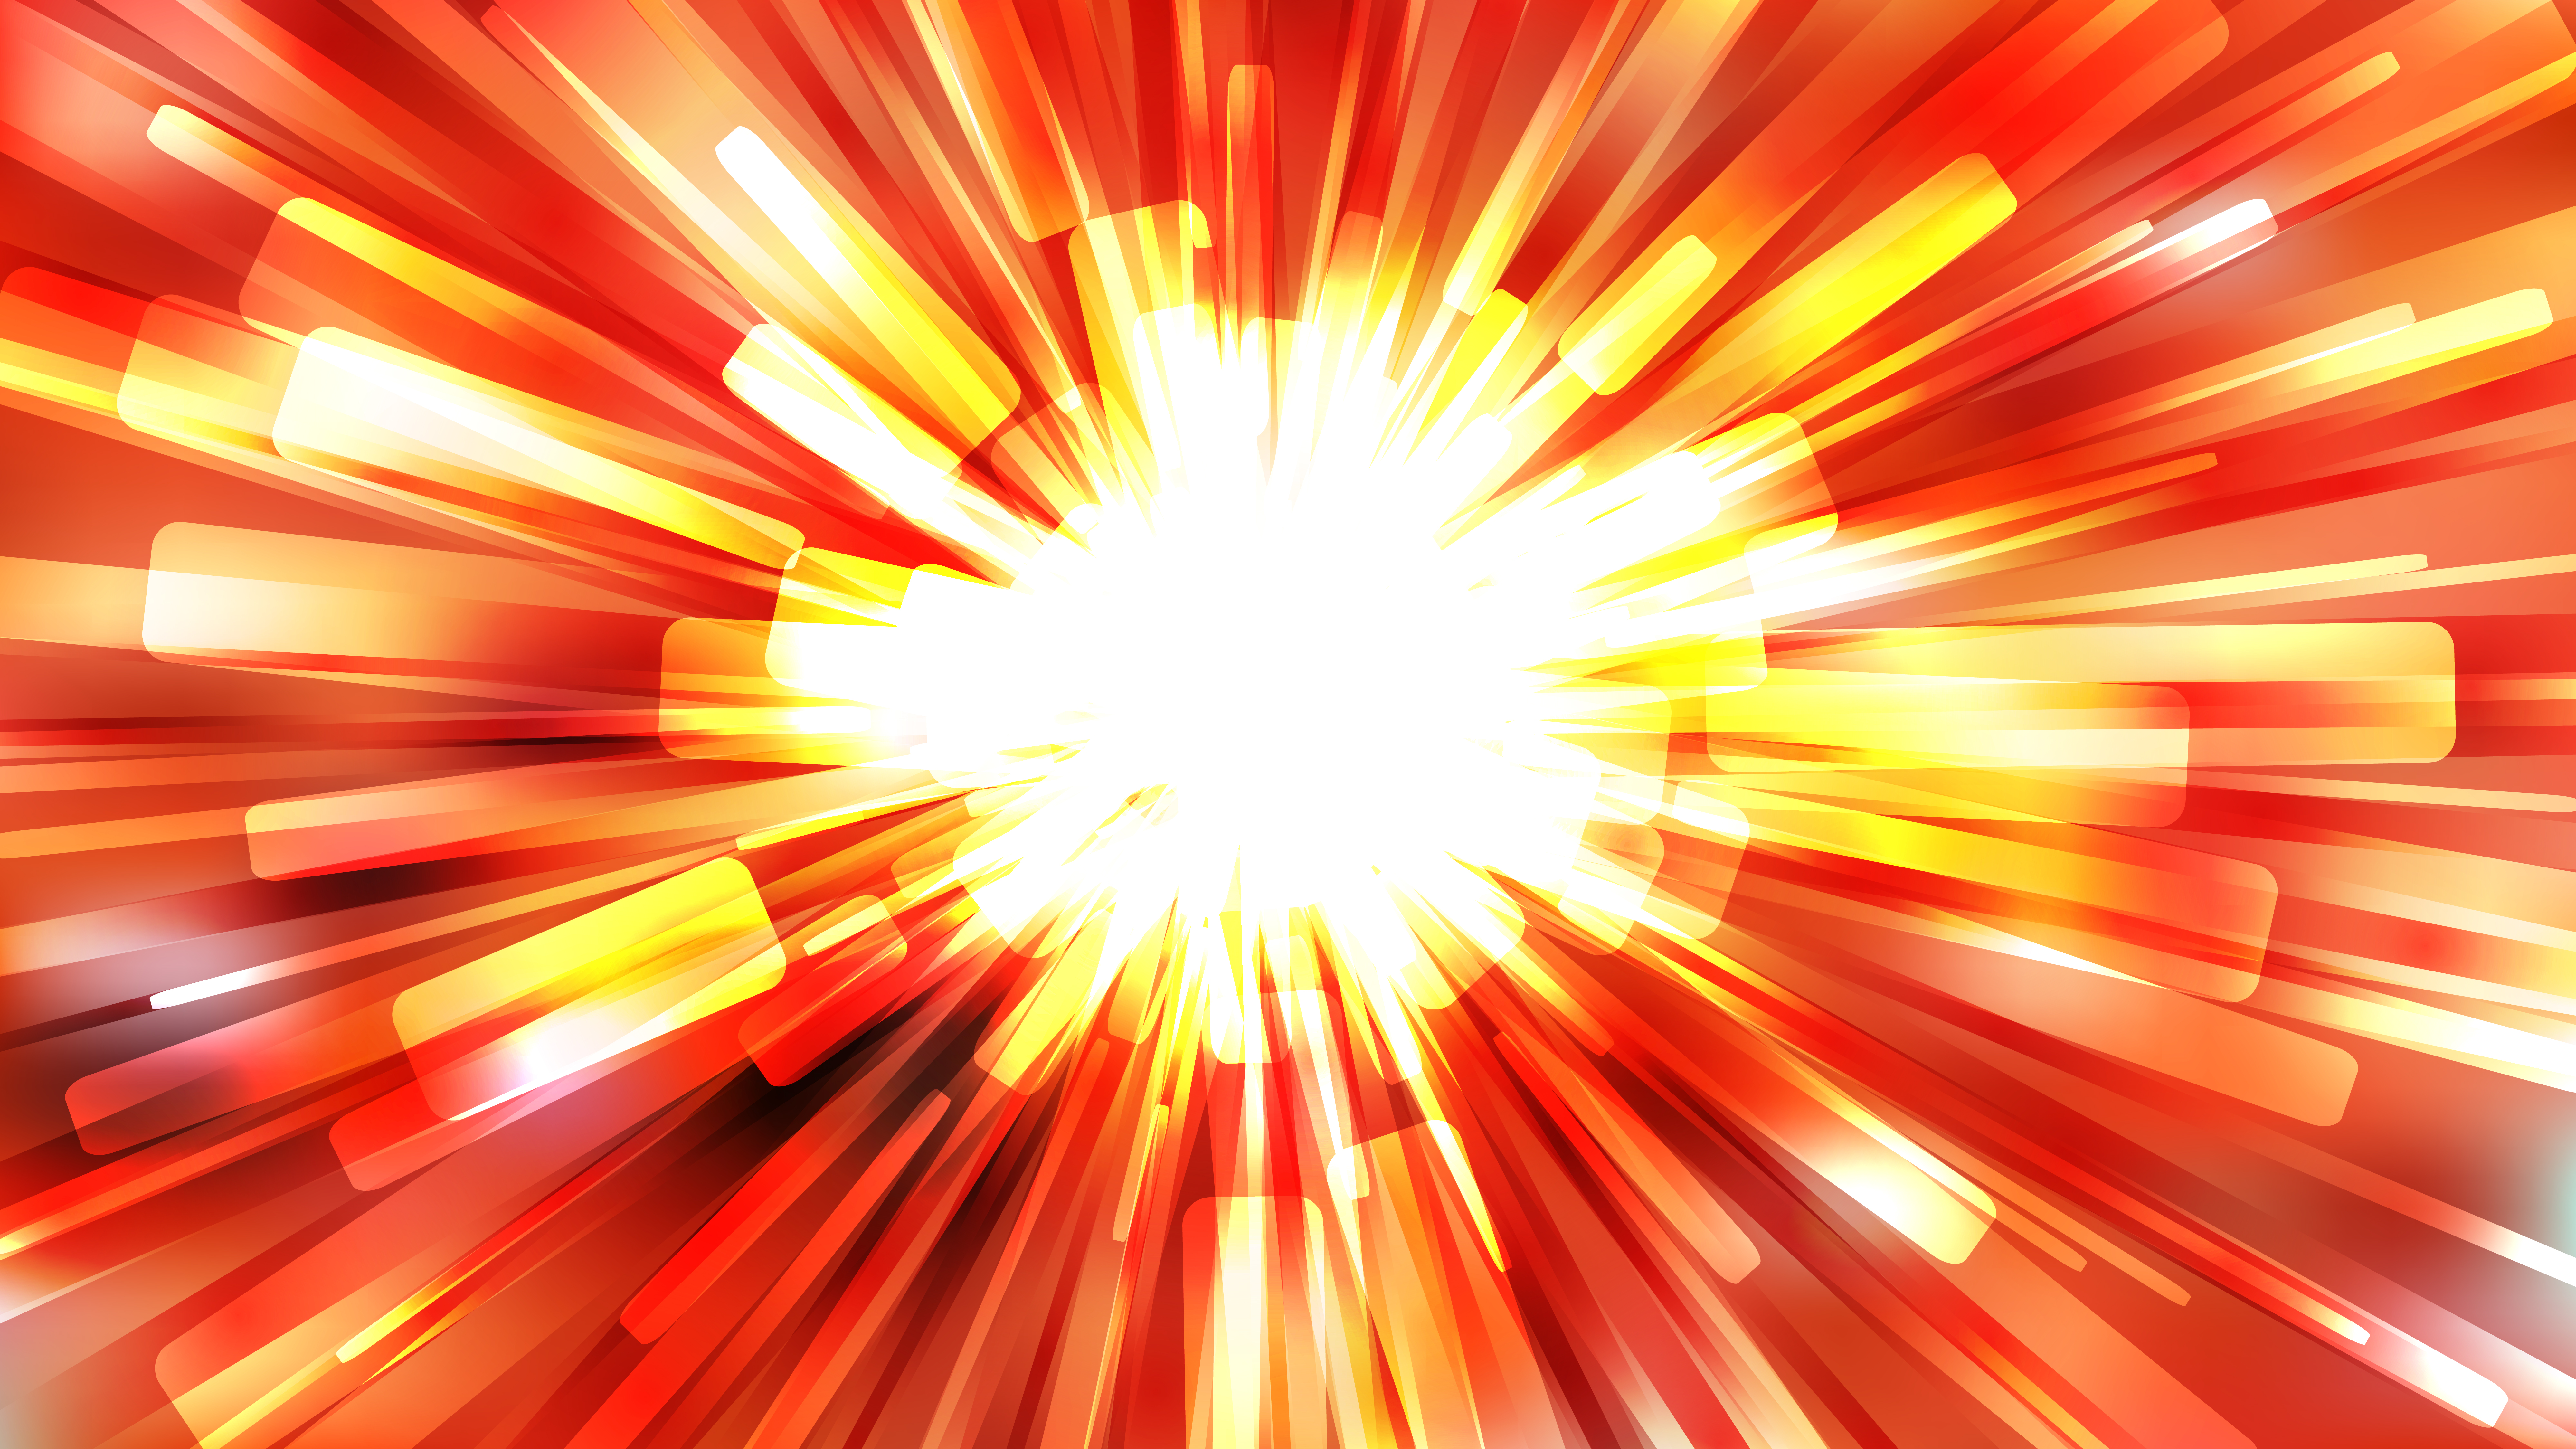 Free Abstract Red White and Yellow Sunburst Background